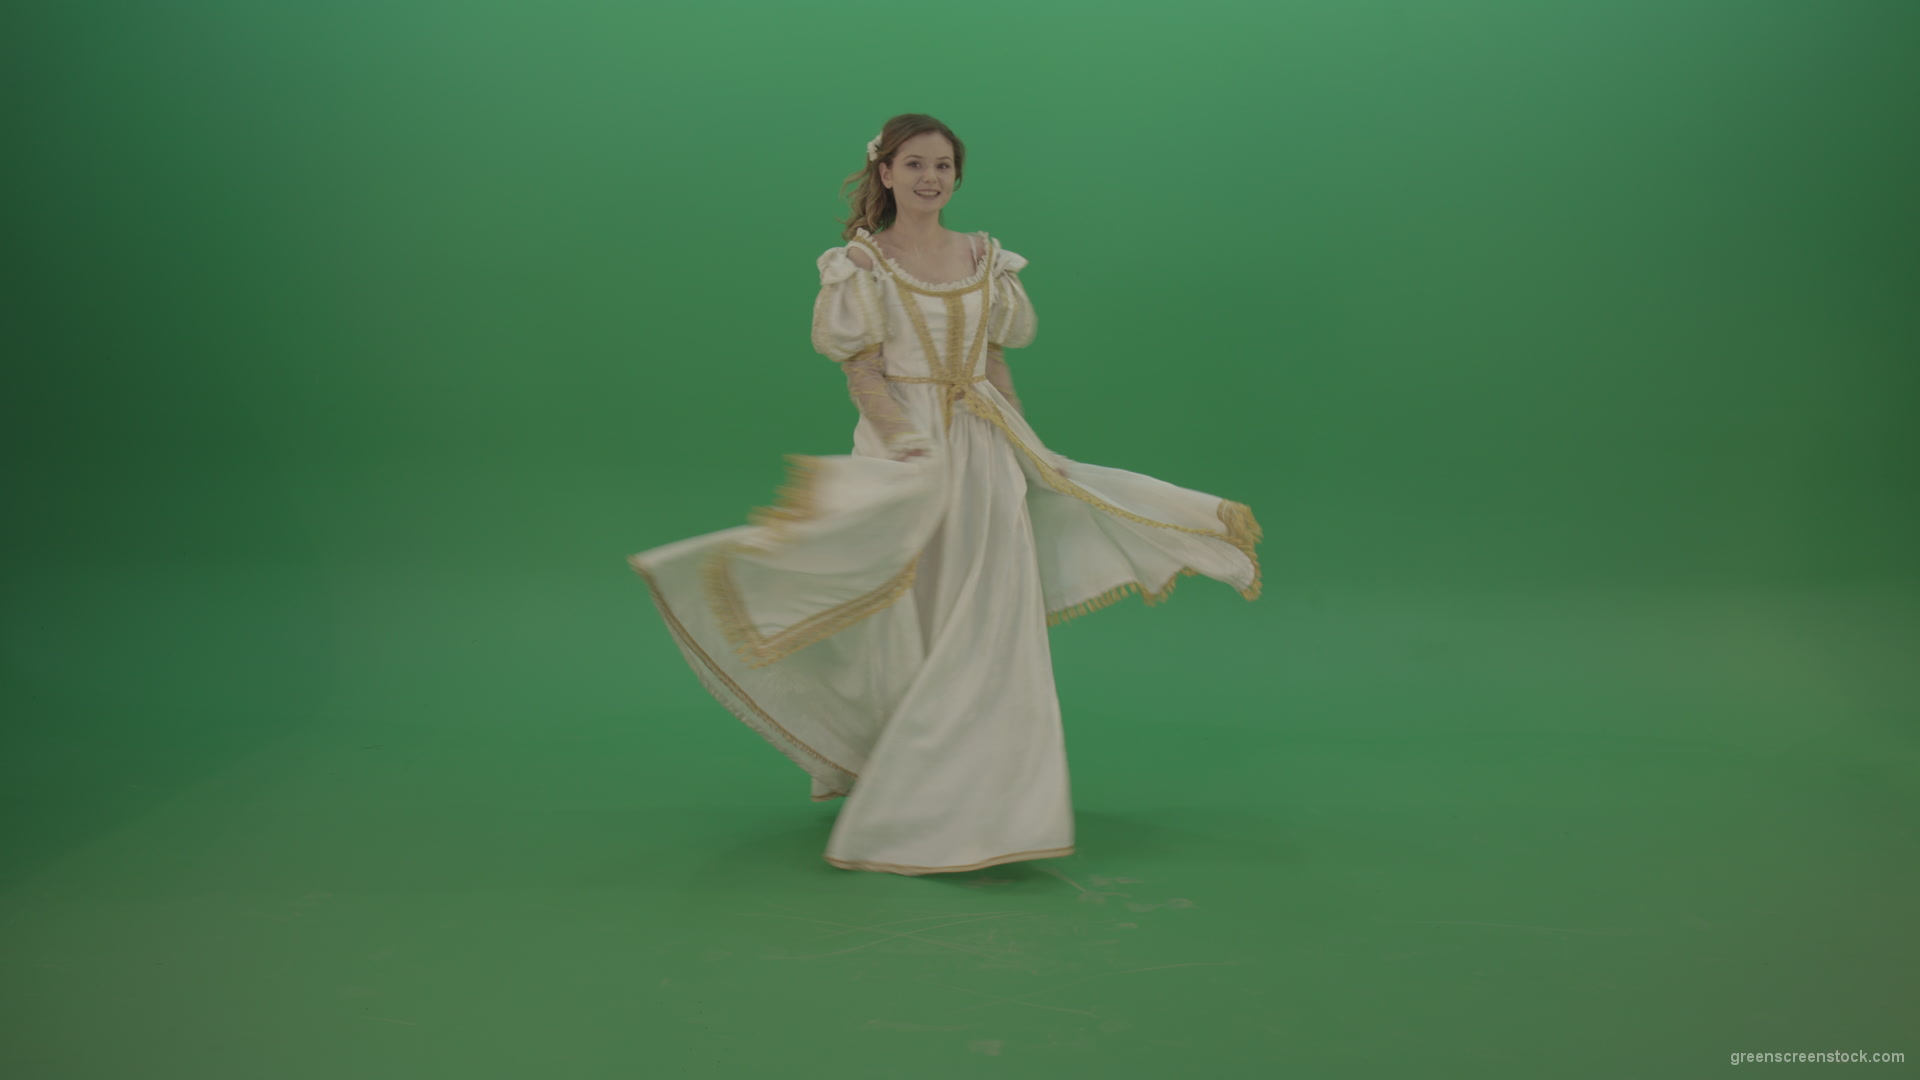 Merry-medieval-girl-dancing-and-rejoicing-isolated-on-green-background_009 Green Screen Stock